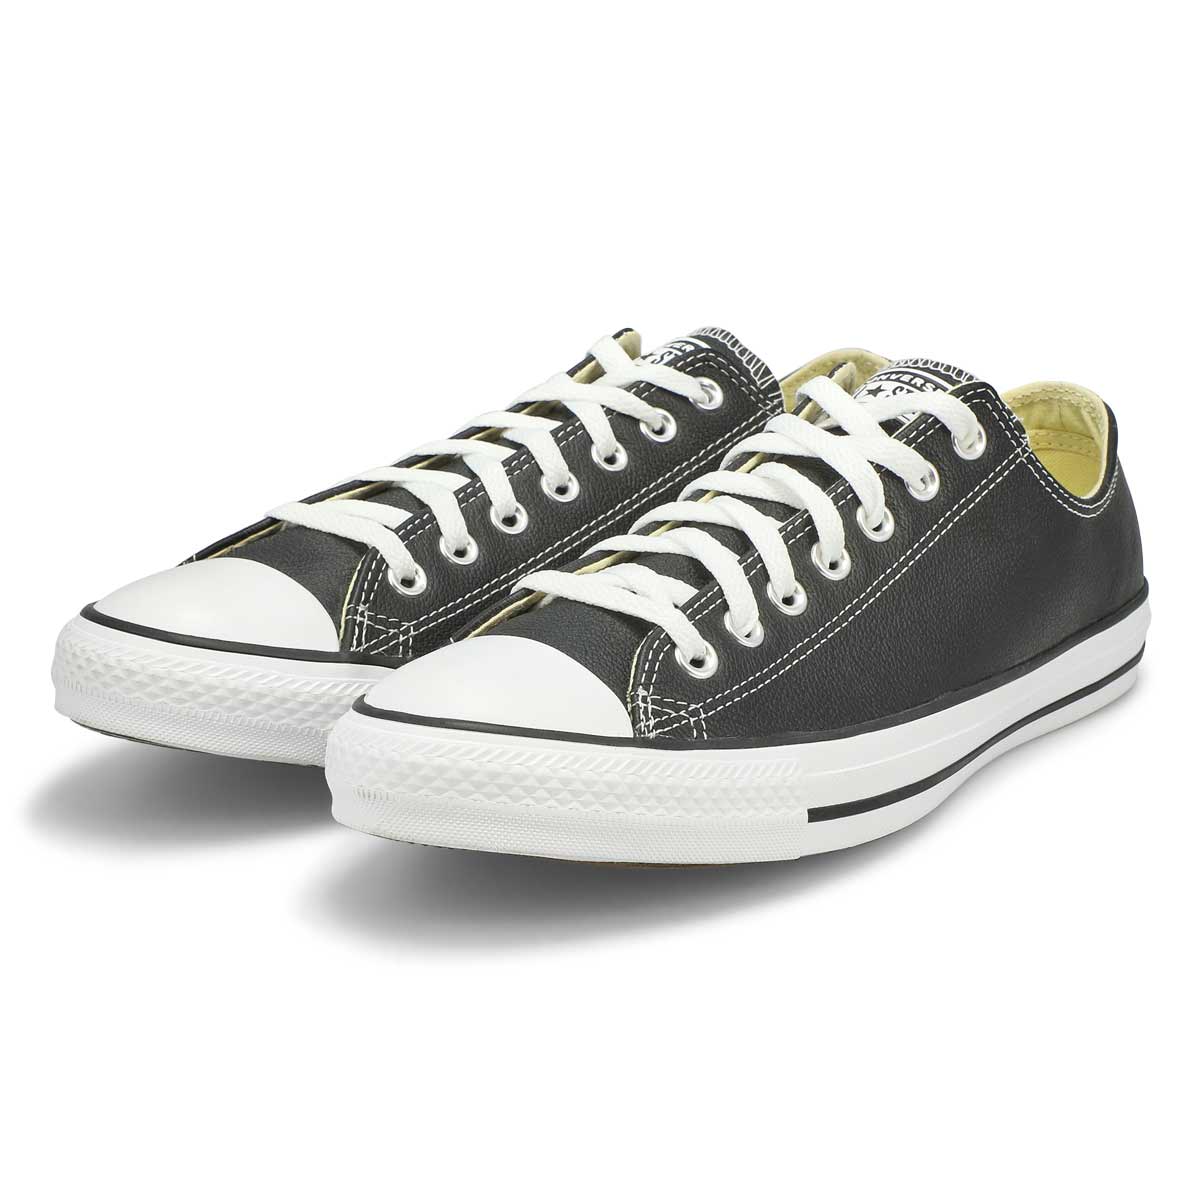 Espadrille CHUCK TAYLOR ALL STAR LEATHER,  hommes